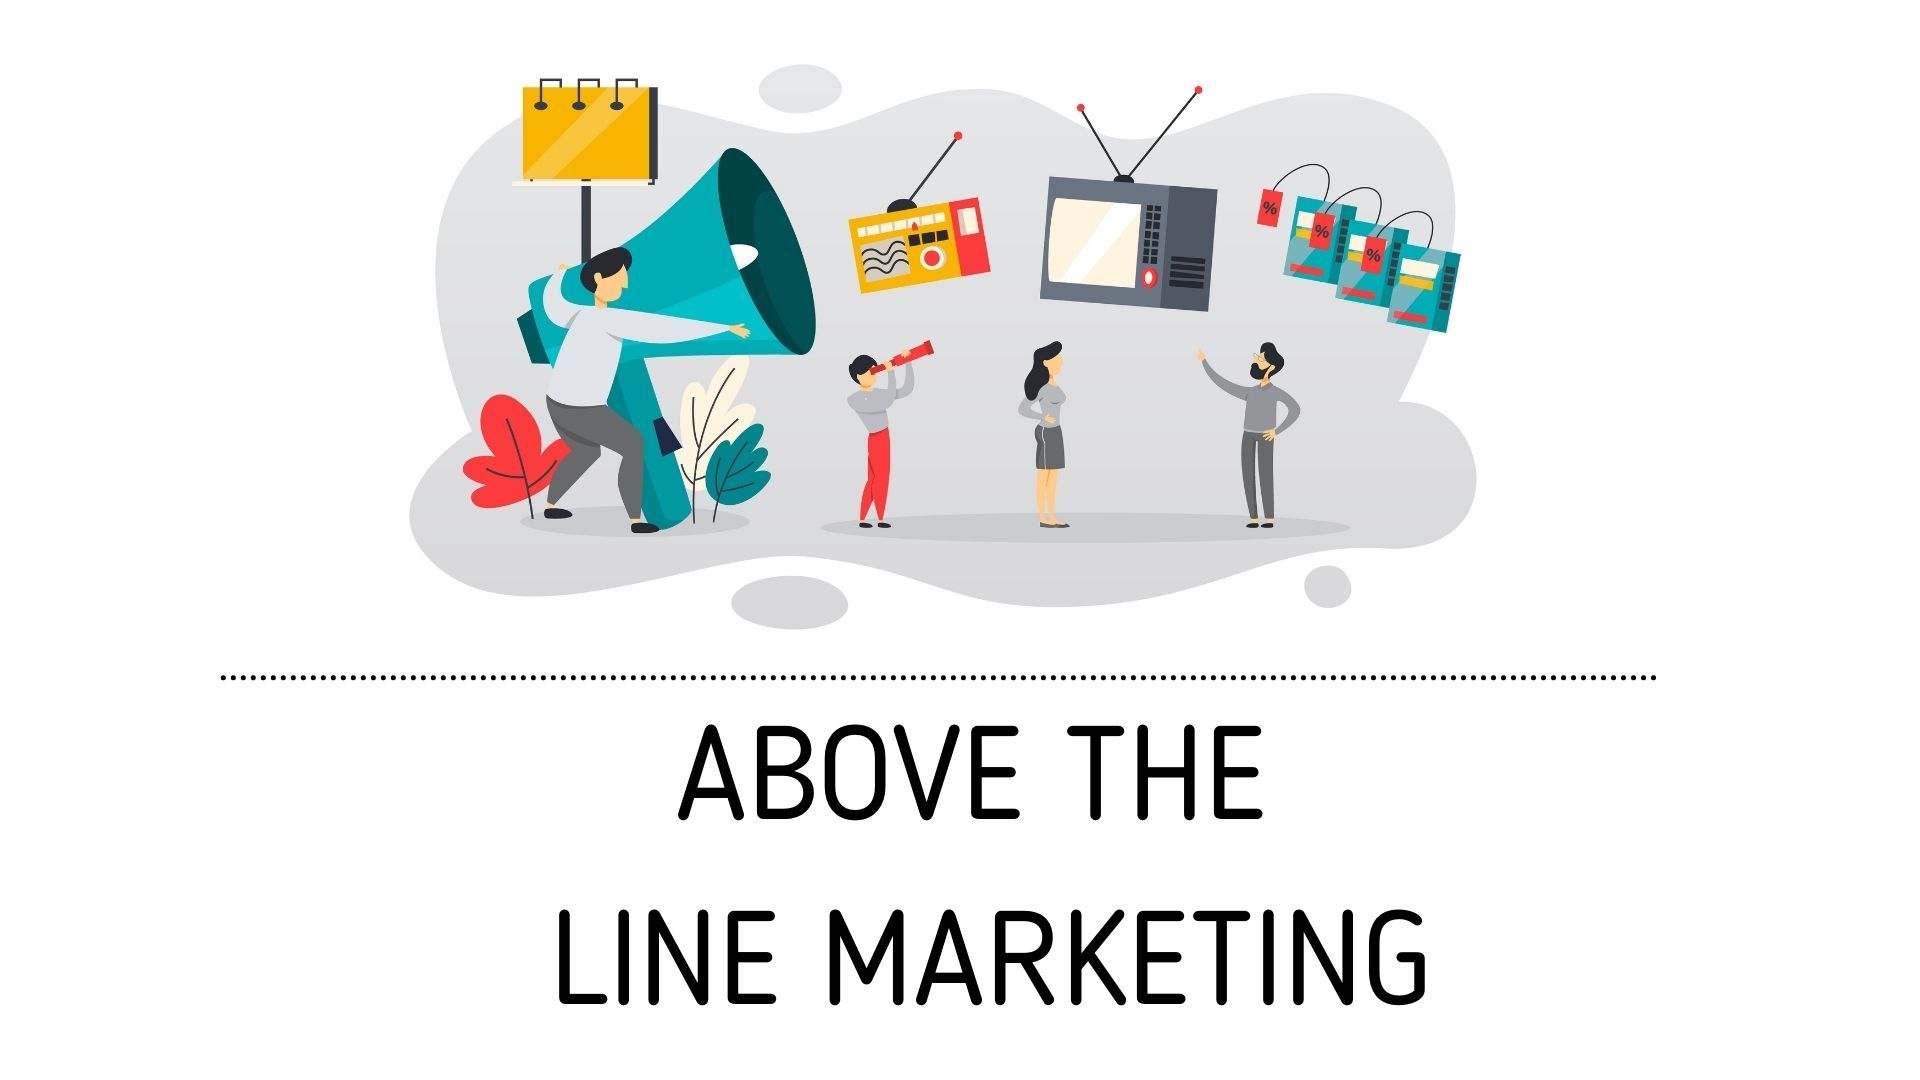 Above the Line Marketing